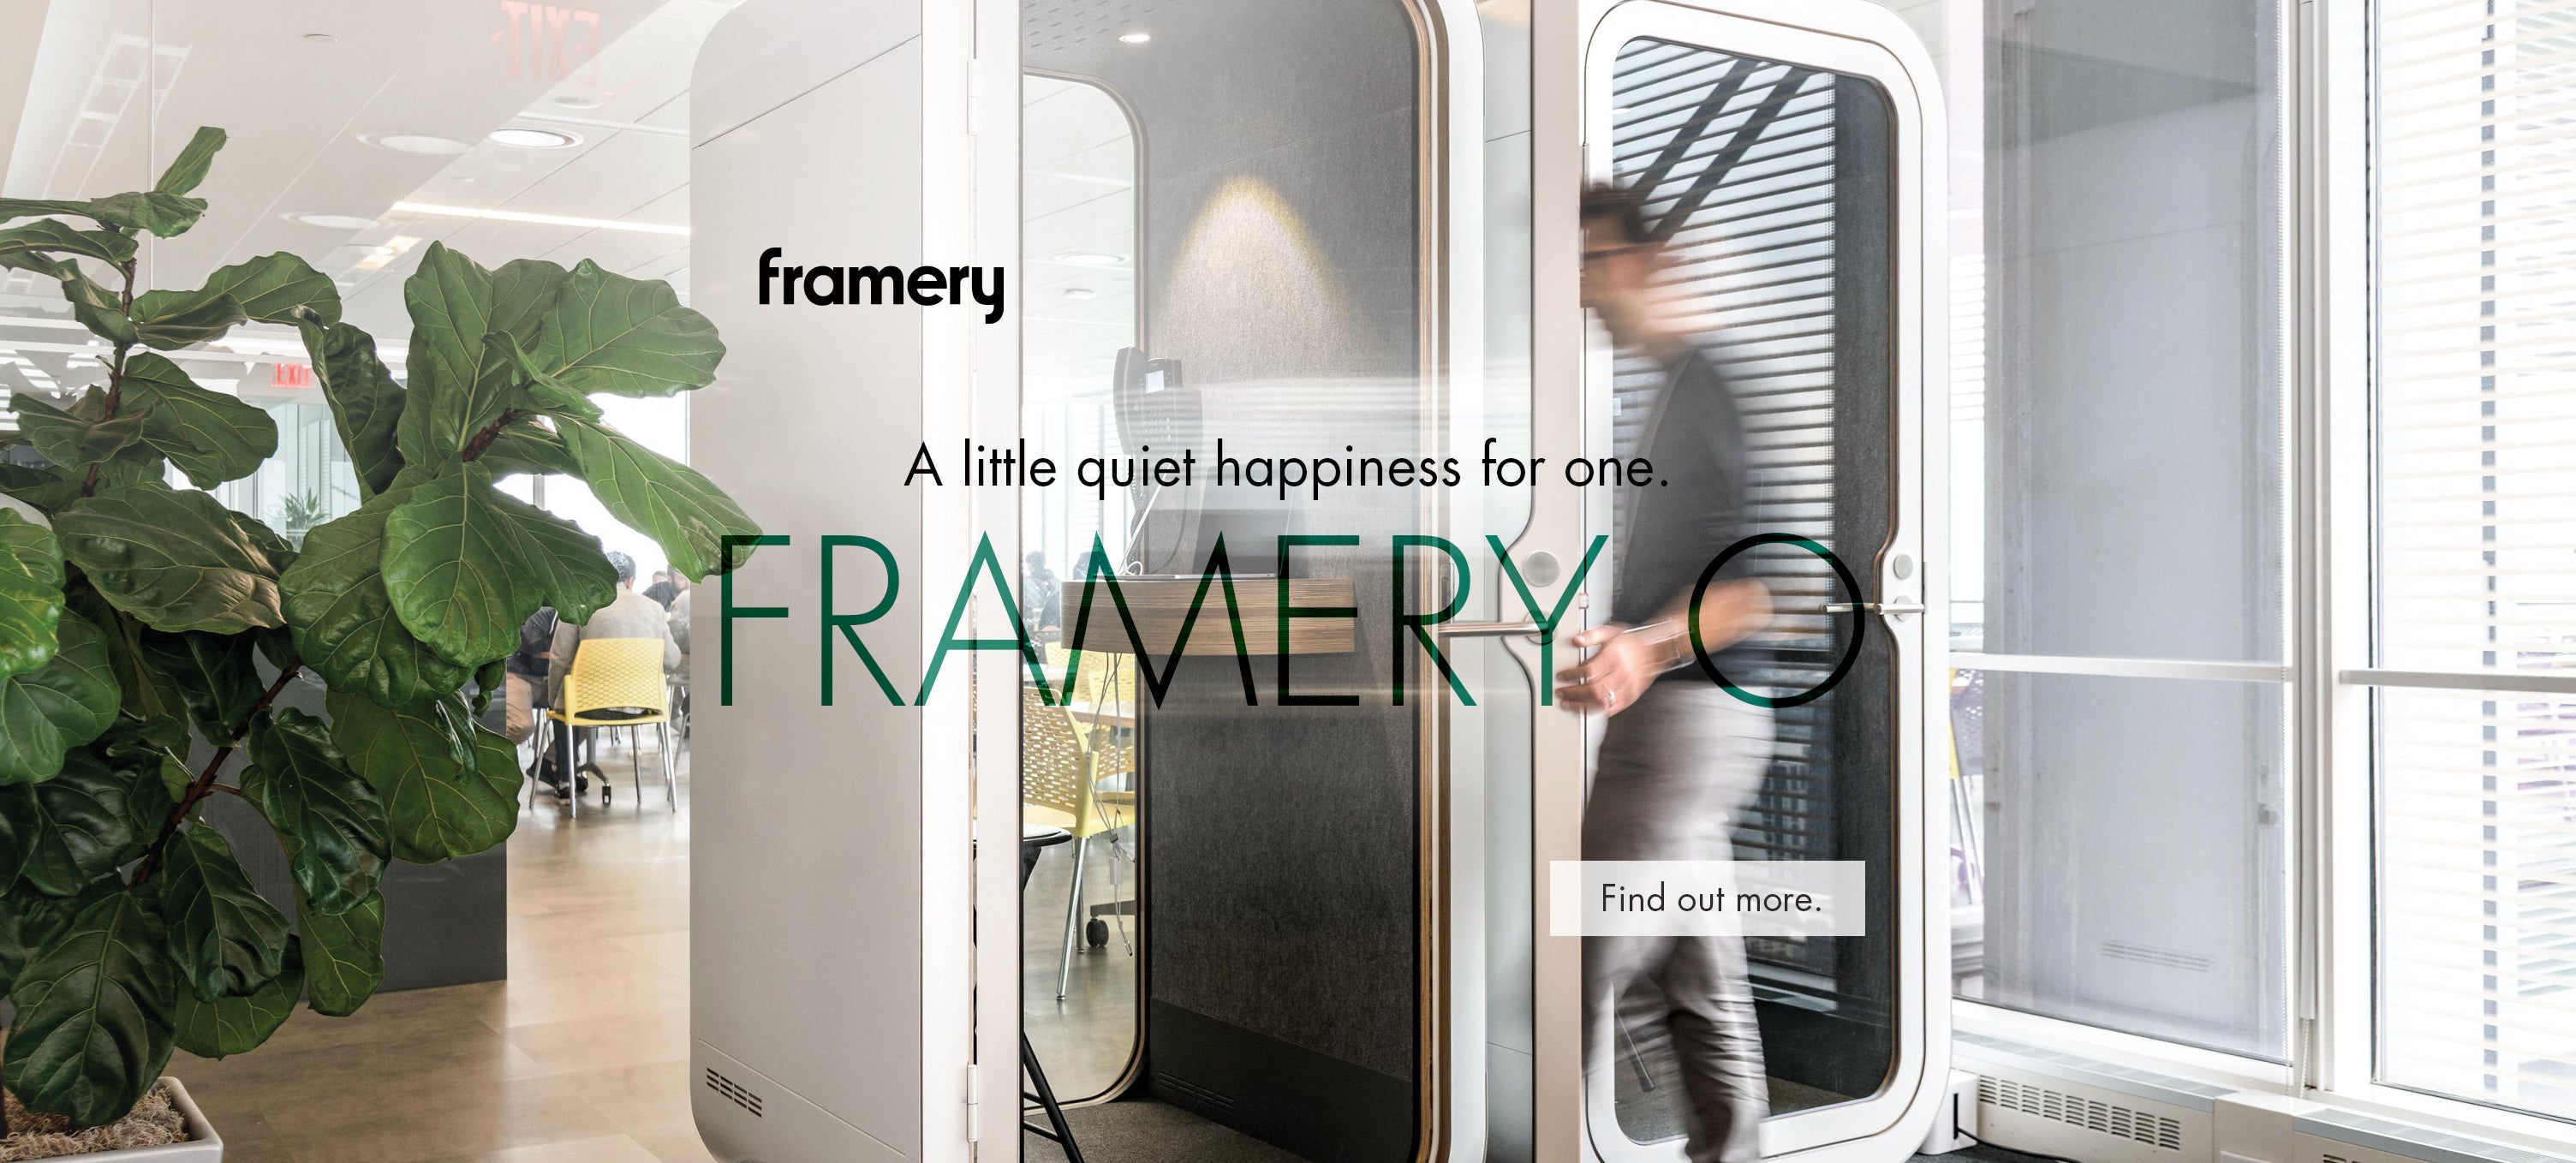 Framery O acoustic phone booth